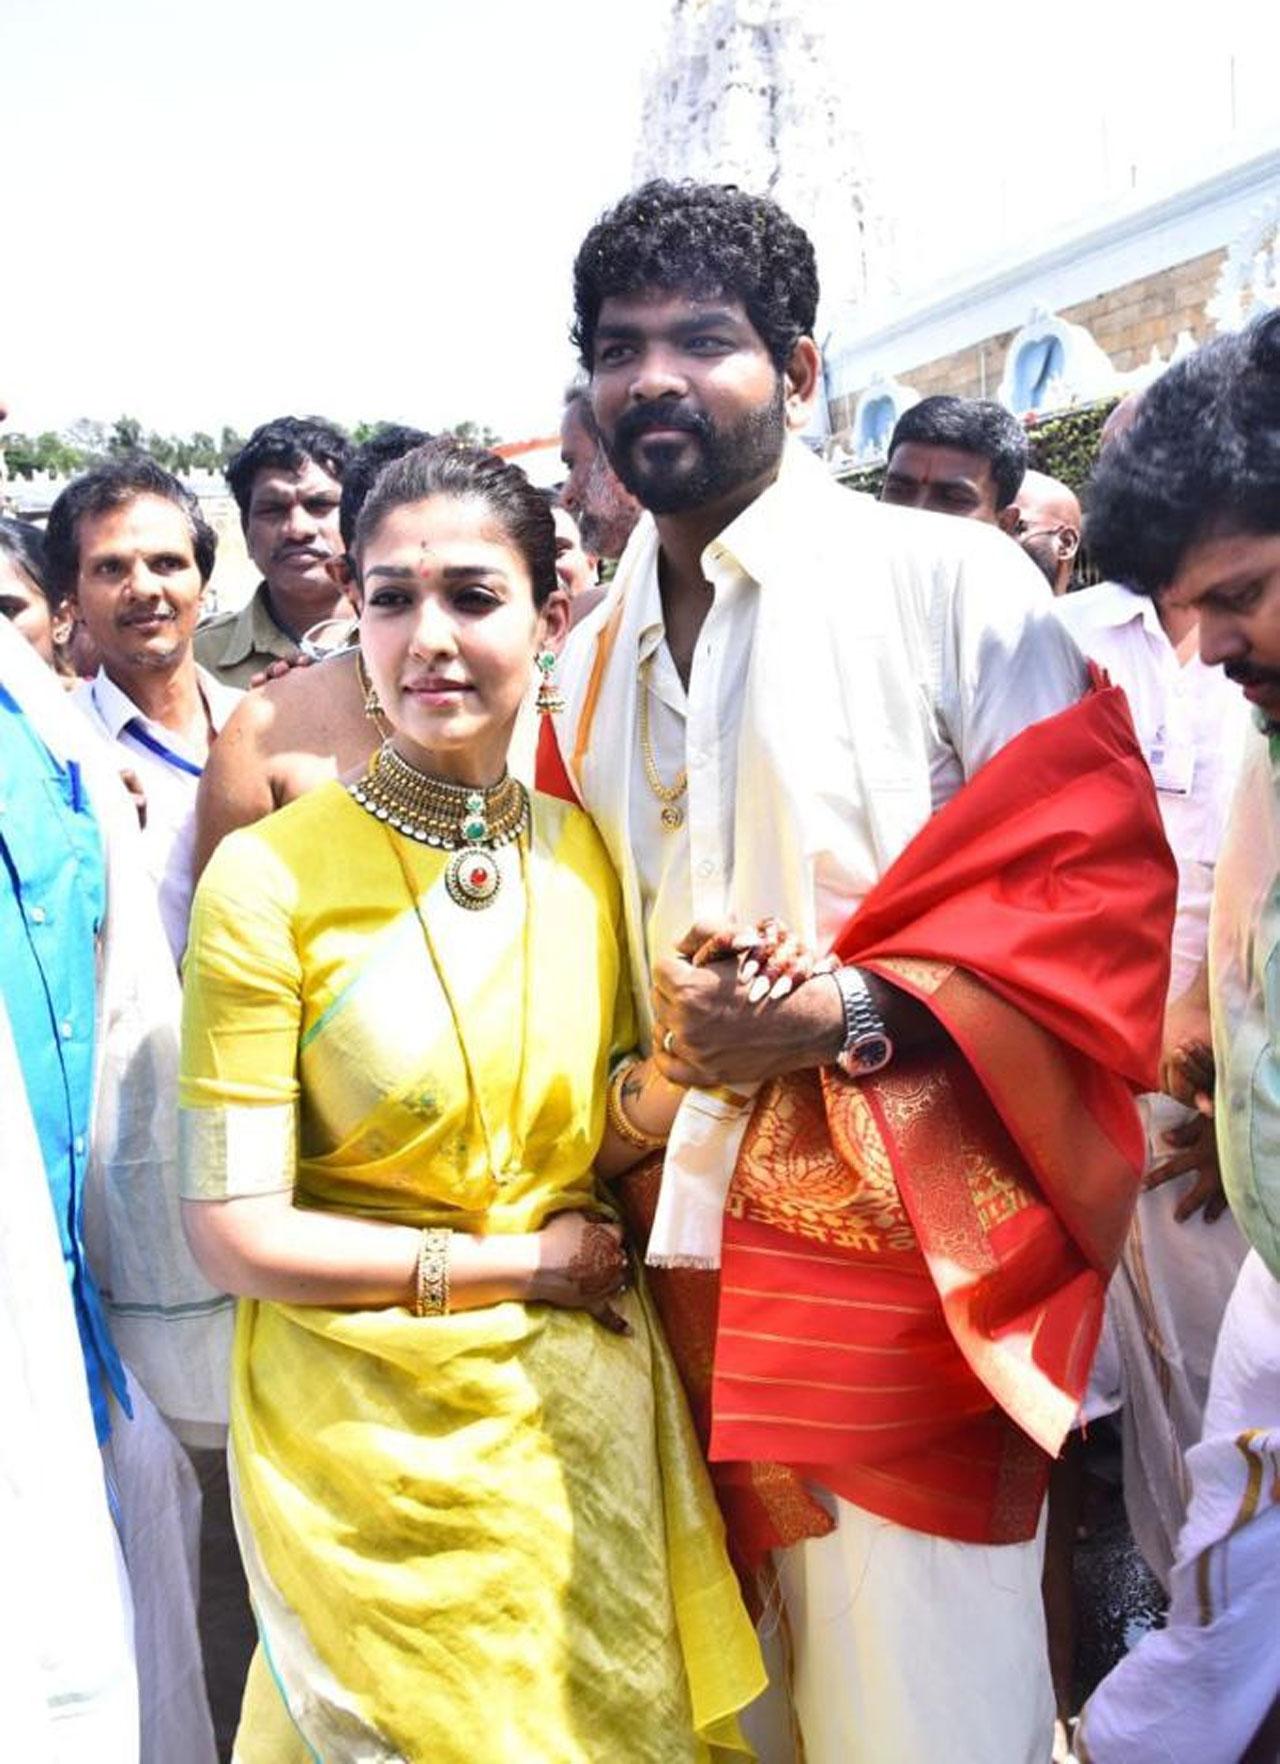 Nayanthara was seen in a stunning yellow sari whereas Vignesh Shivan was clicked in a white shirt and dhoti. Vignesh Shivan wed the love of his life, actress Nayanthara on Thursday in the presence of close family members and a host of friends from the film industry. The guests included stars like Rajinikanth and Shah Rukh Khan